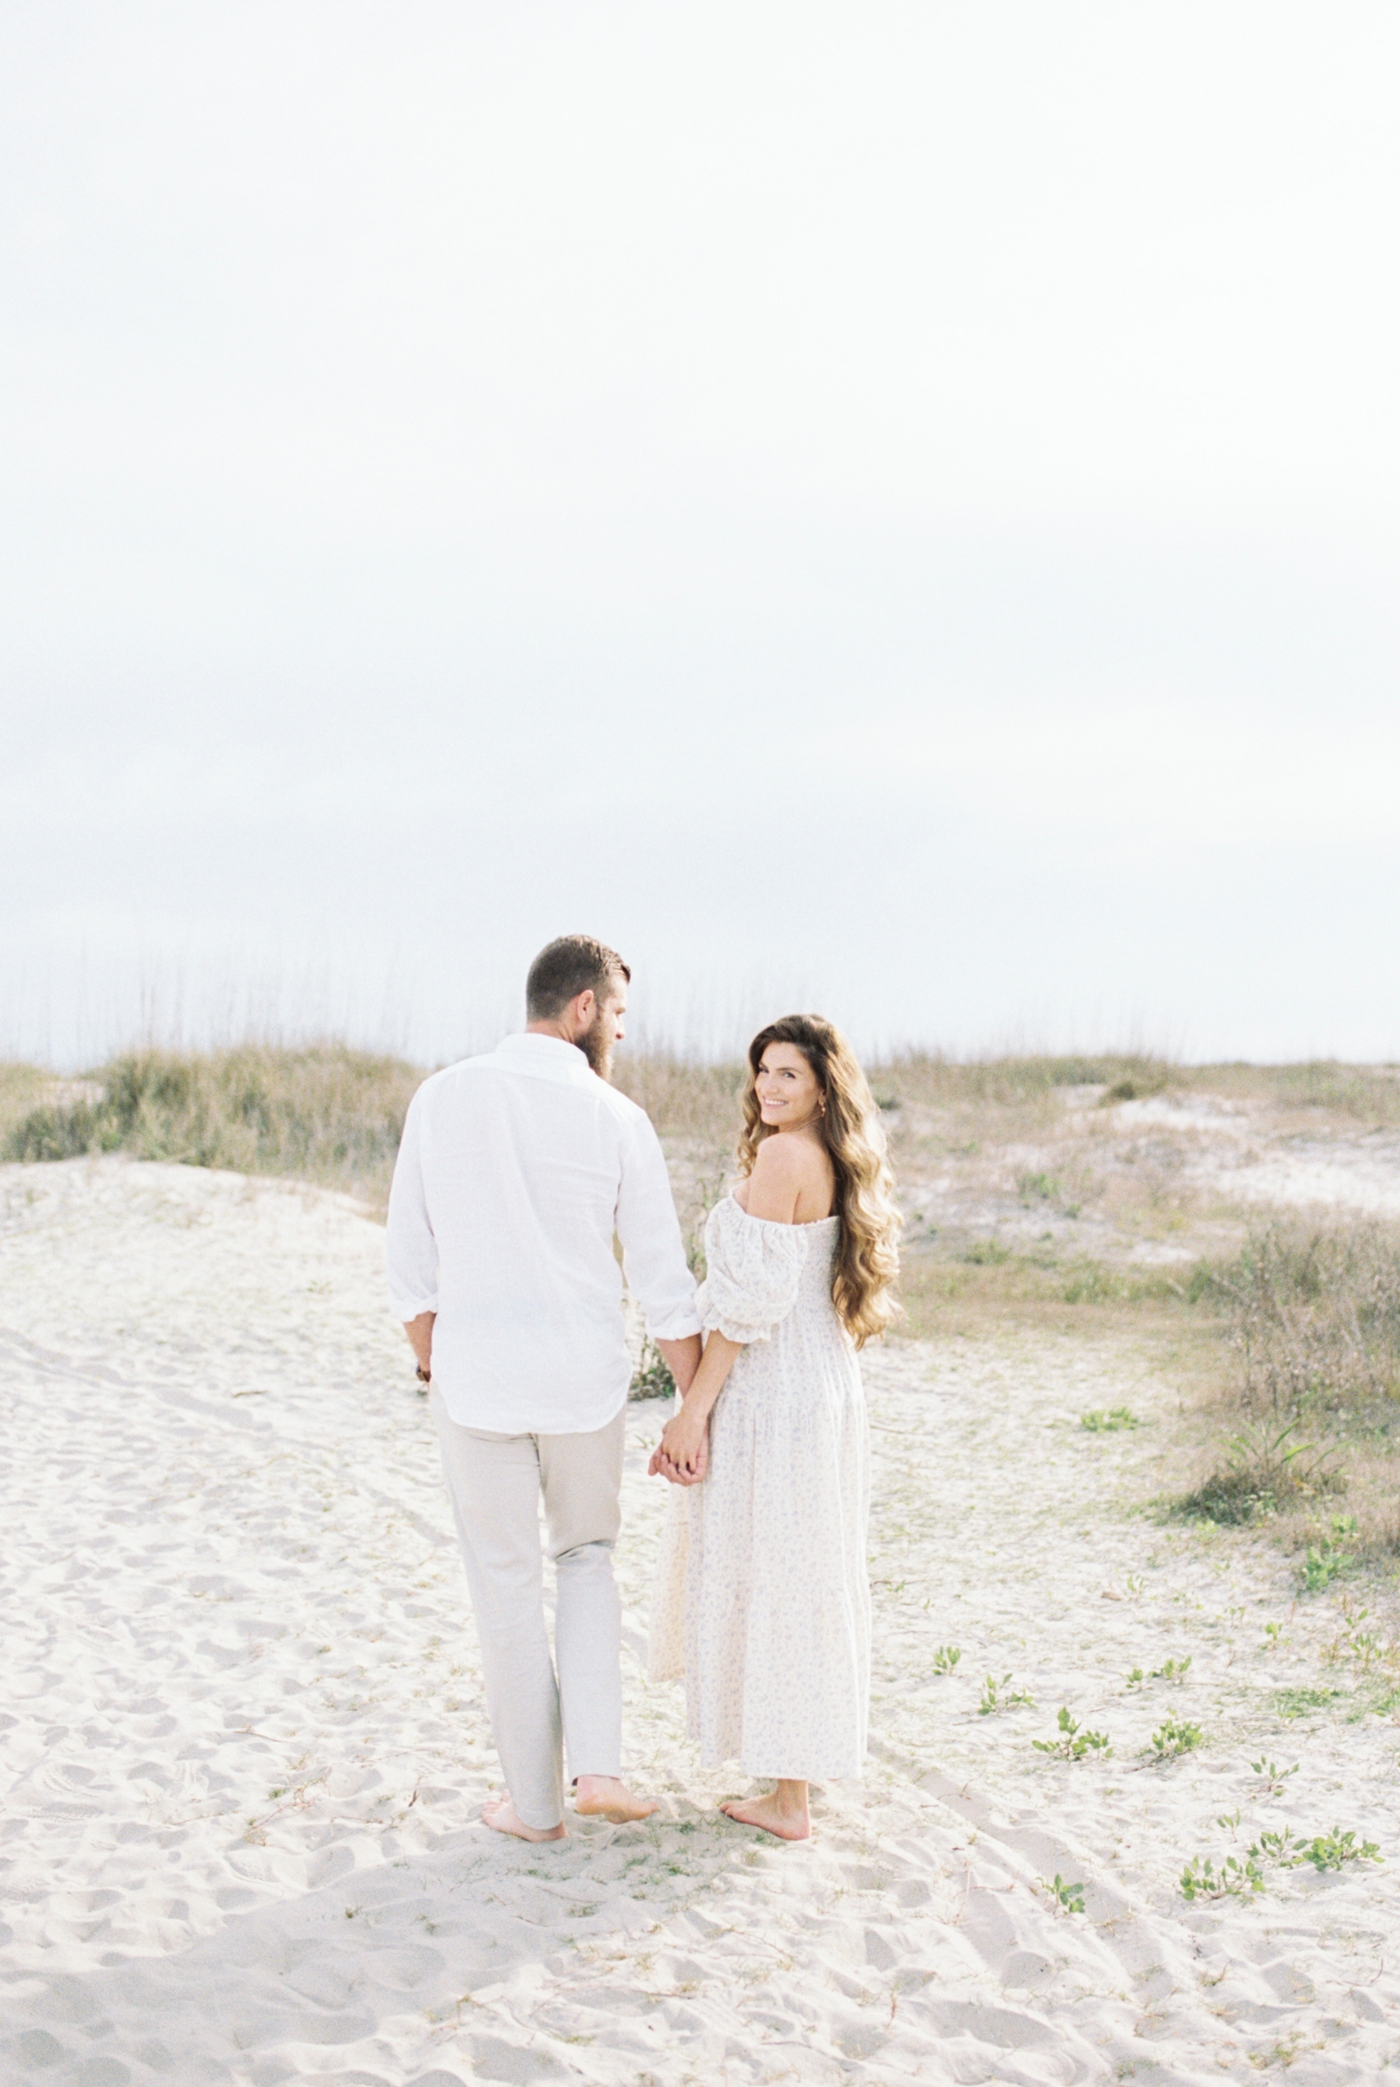 Couple walking on the beach at Sullivans Island | Photo by Caitlyn Motycka Photography.